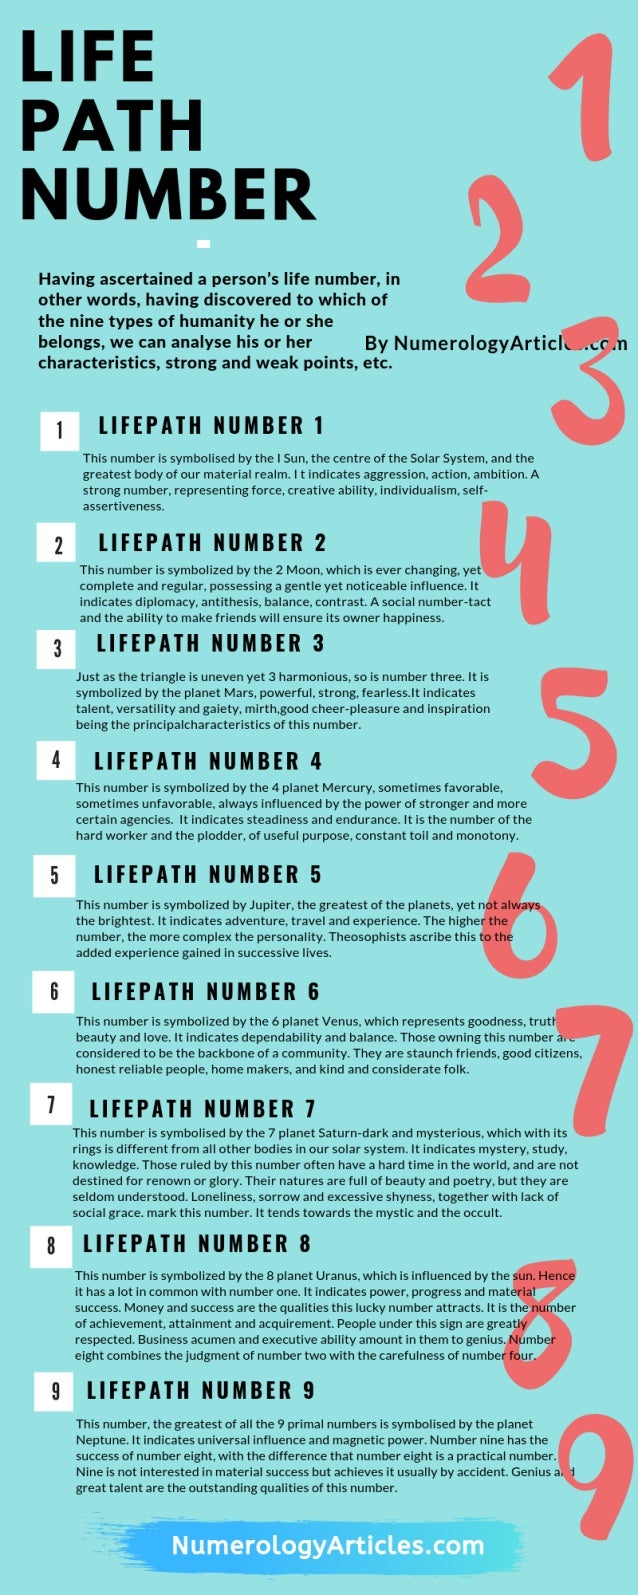 The life path number and what it indicate